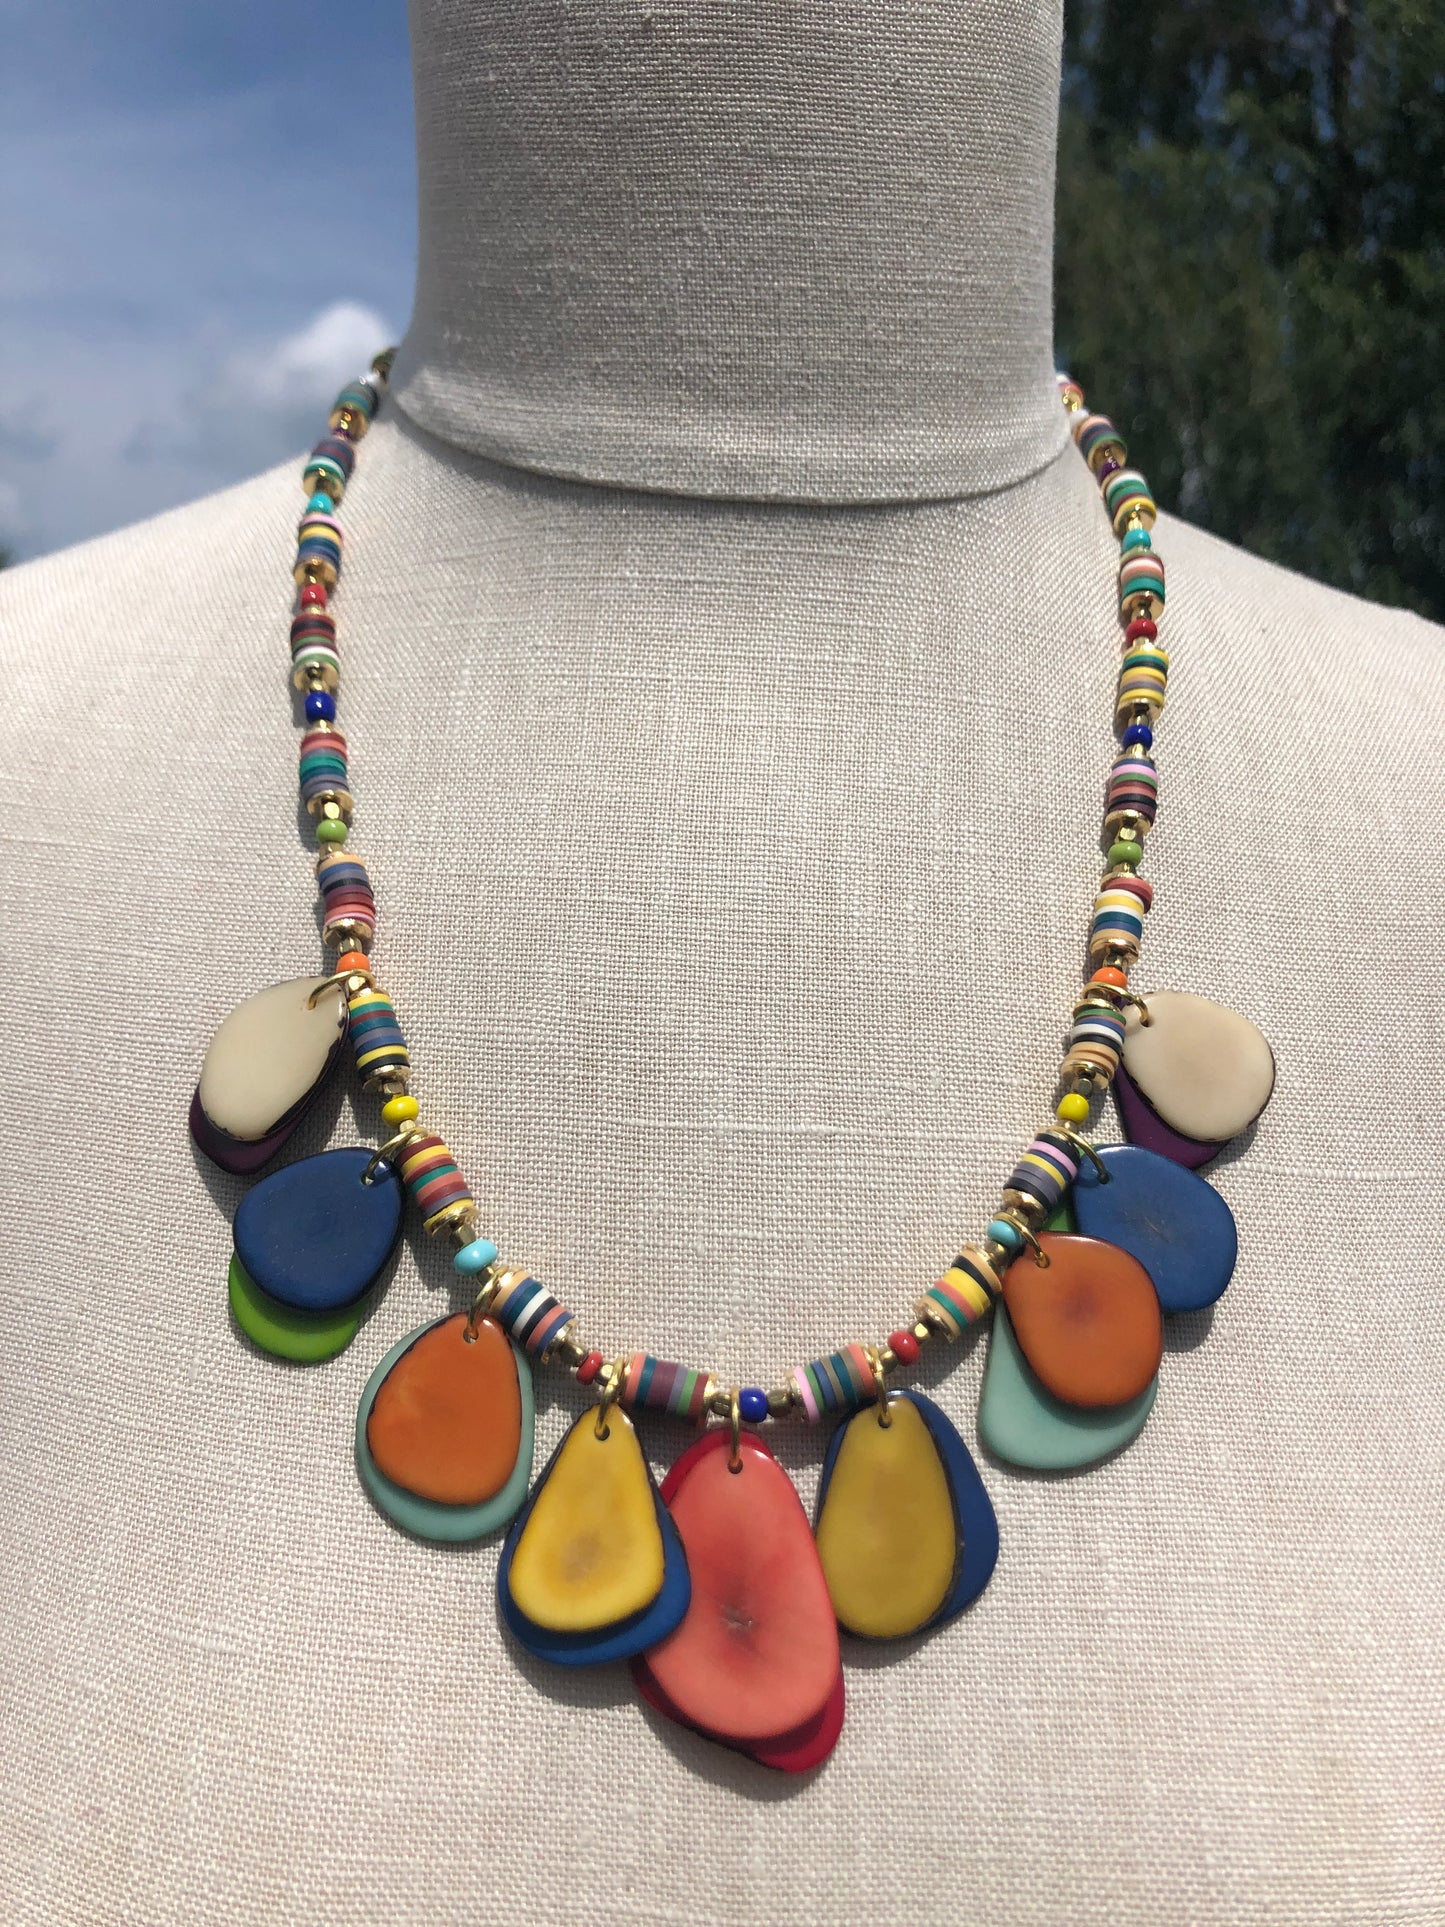 Tagua Nut Necklace, Hand Beaded, Gold Tones, Jewelry